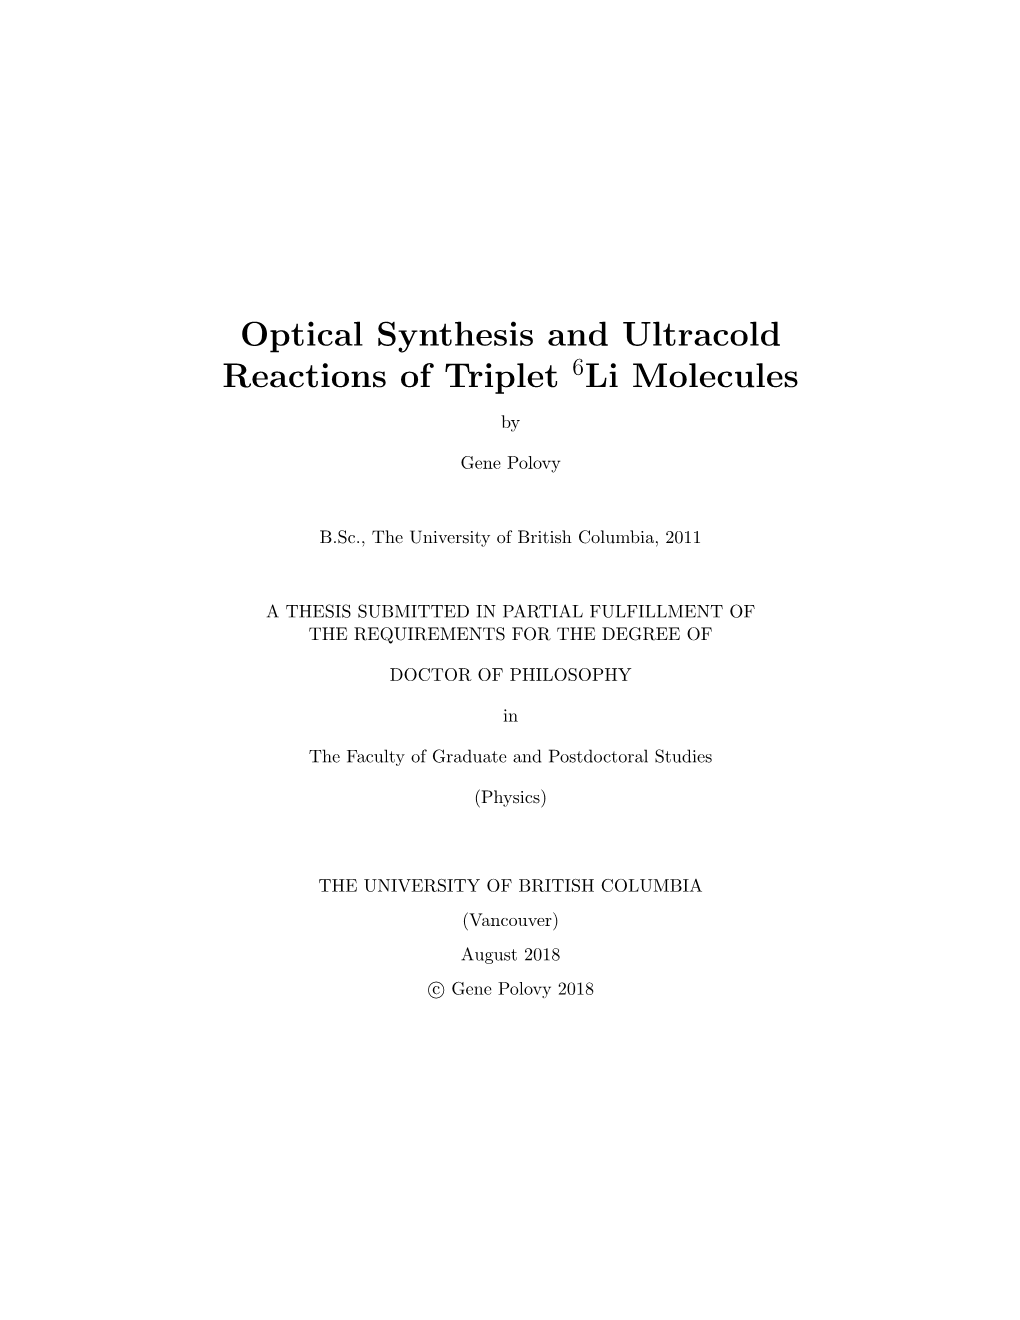 Optical Synthesis and Ultracold Reactions of Triplet Li Molecules